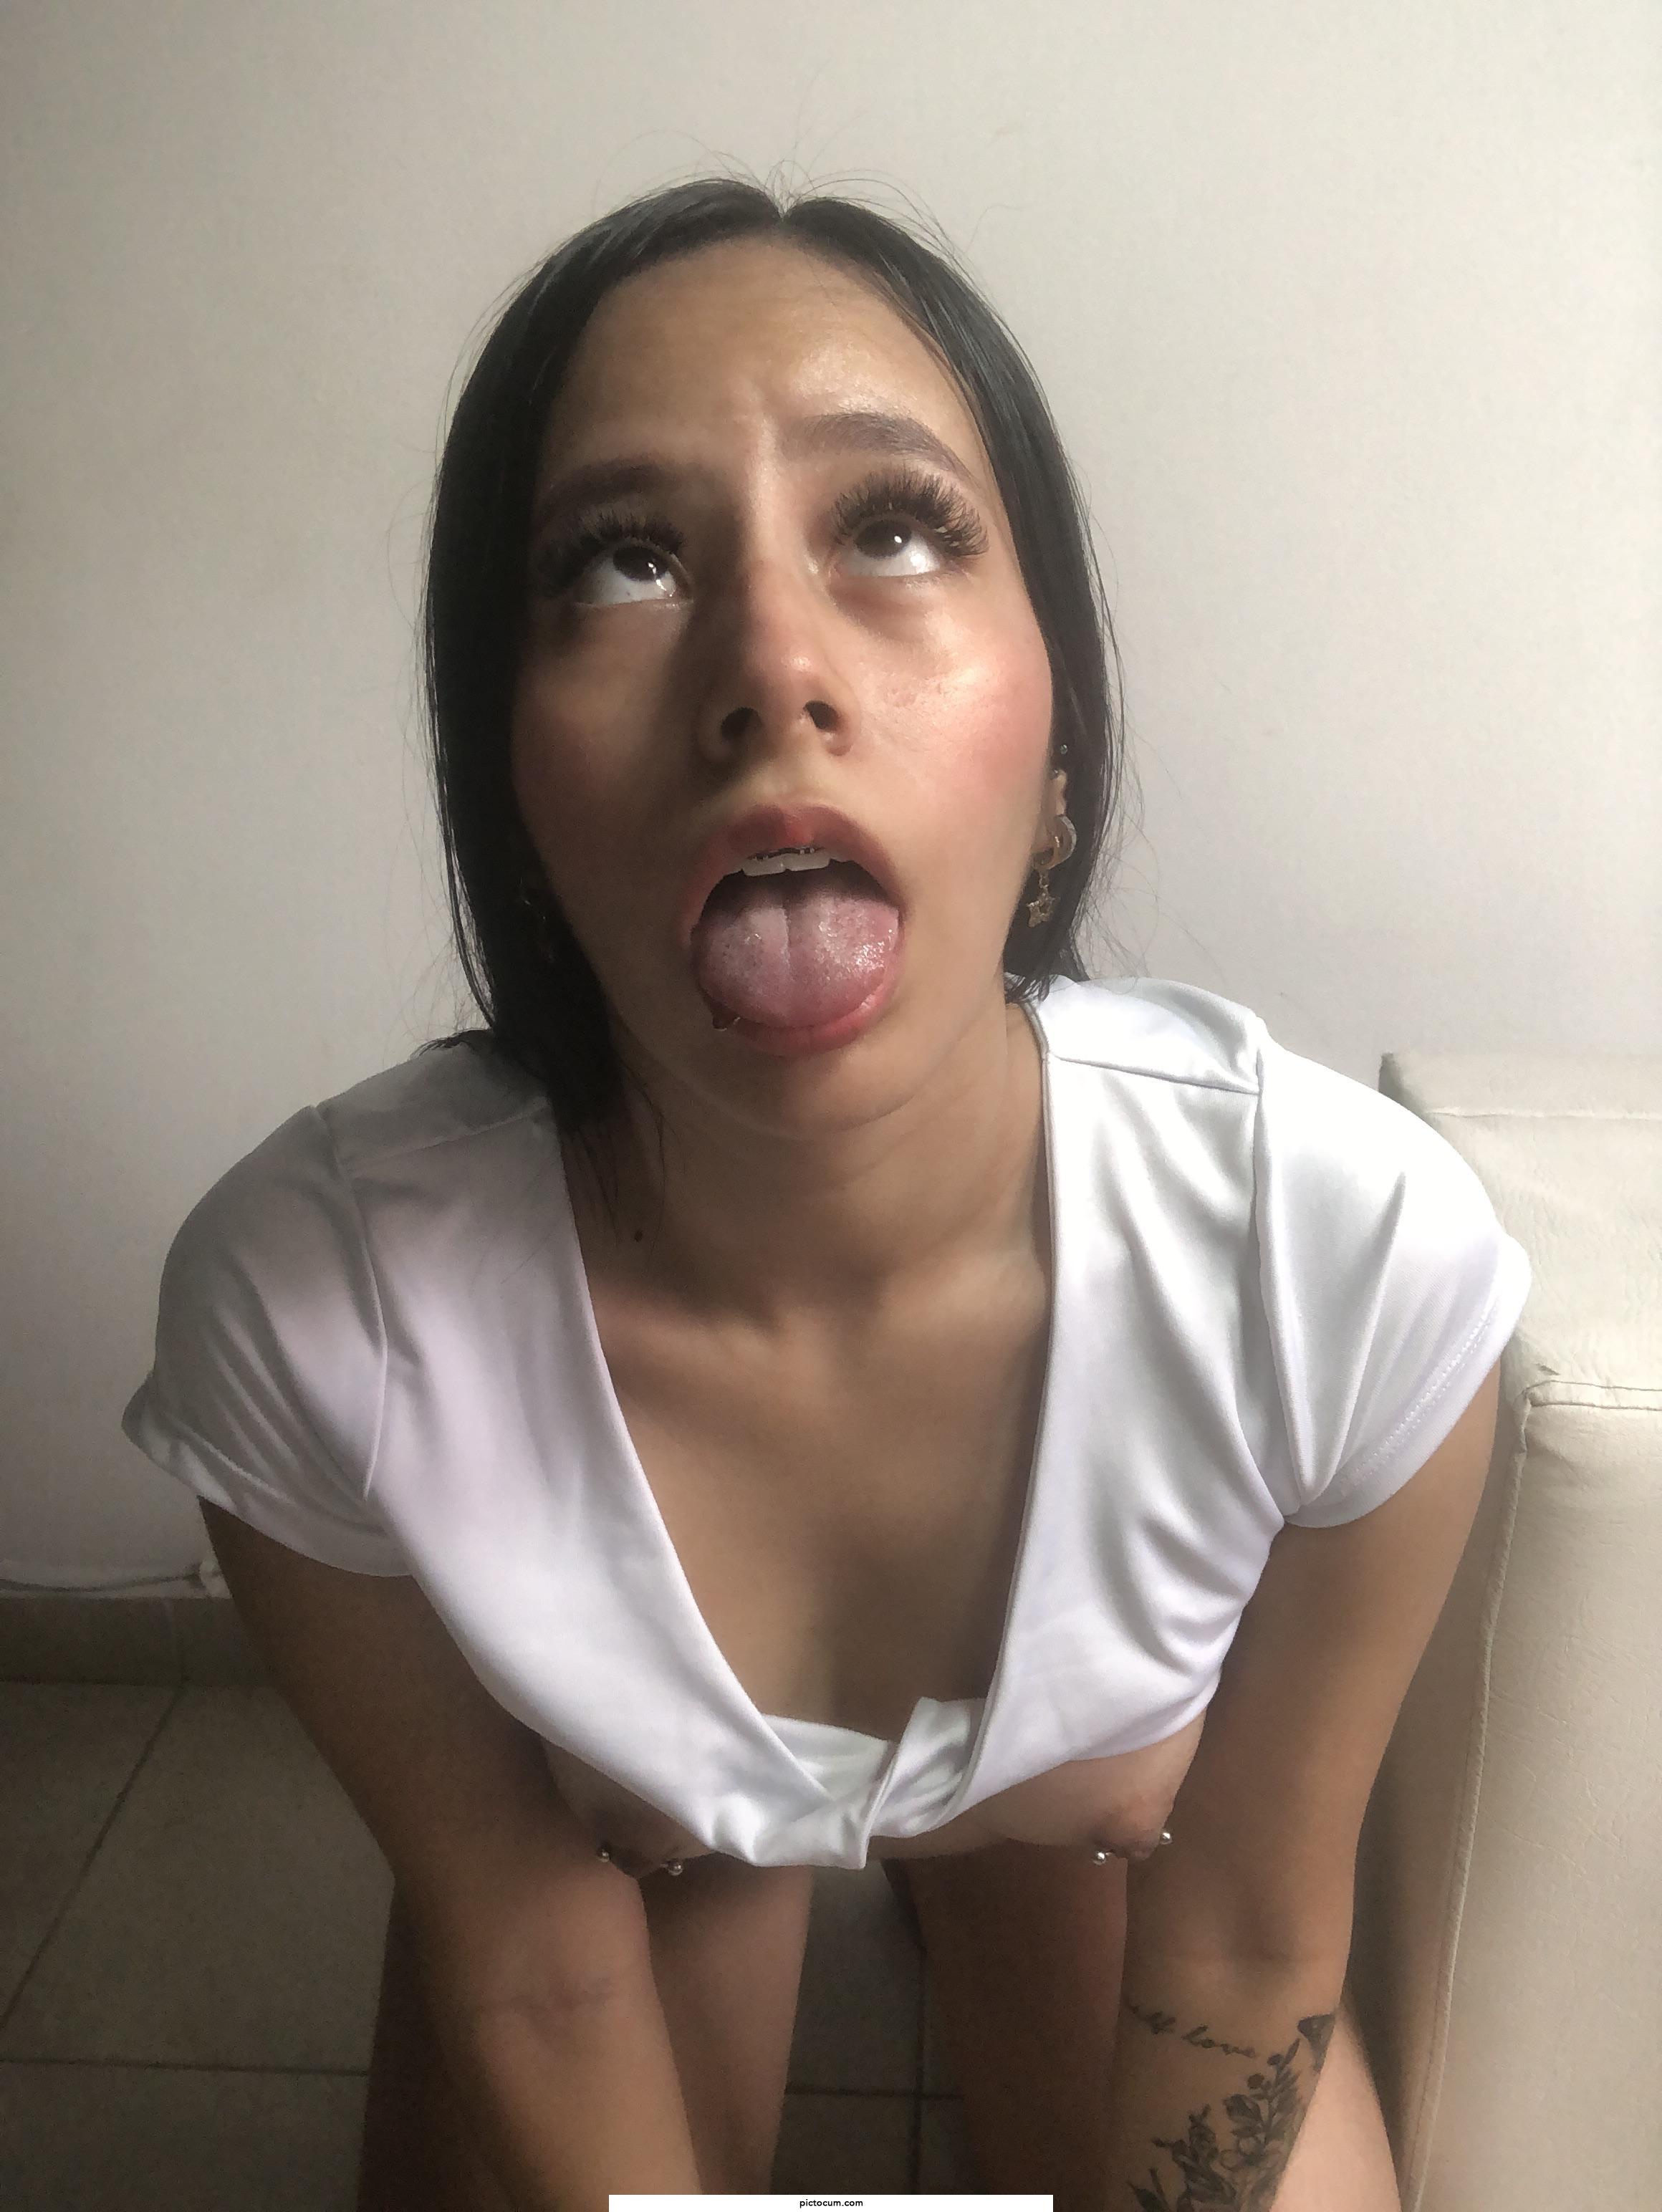 I'm waiting for your cum on my face with ahegao